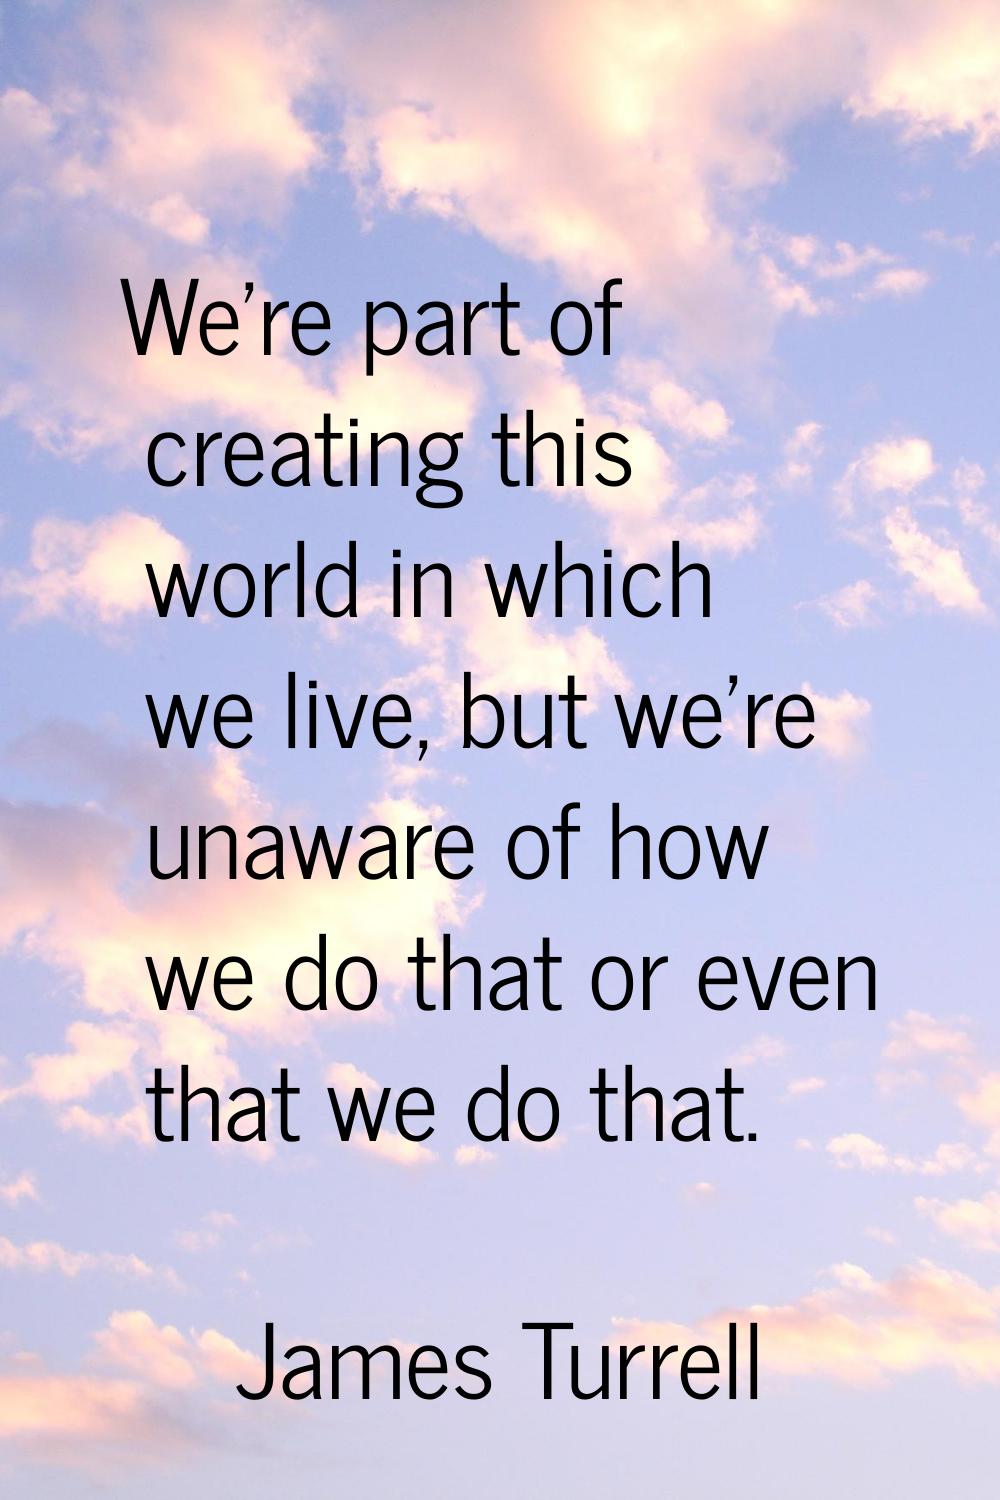 We're part of creating this world in which we live, but we're unaware of how we do that or even tha